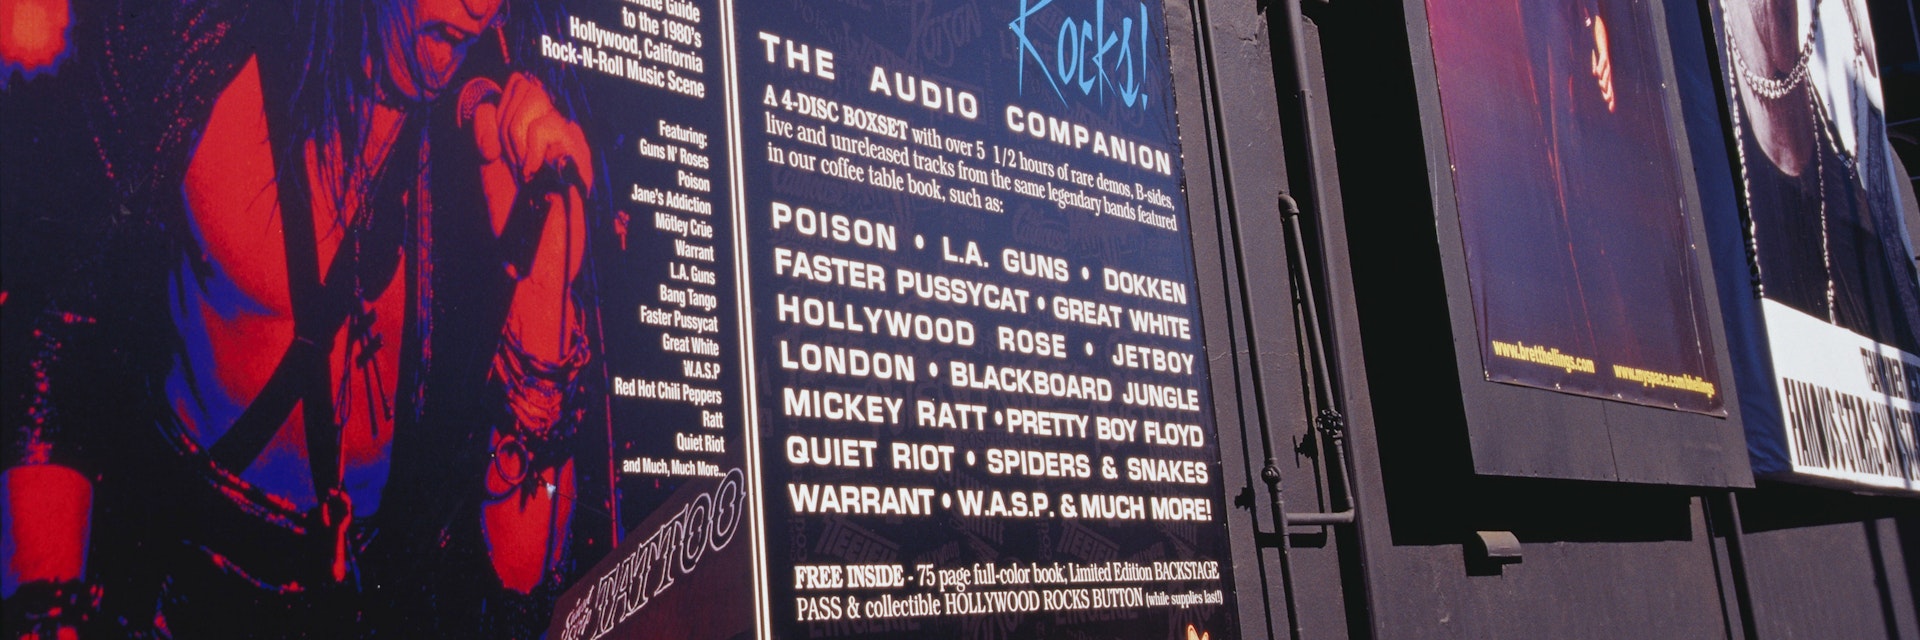 Posters outside Roxy music club, Hollywood.